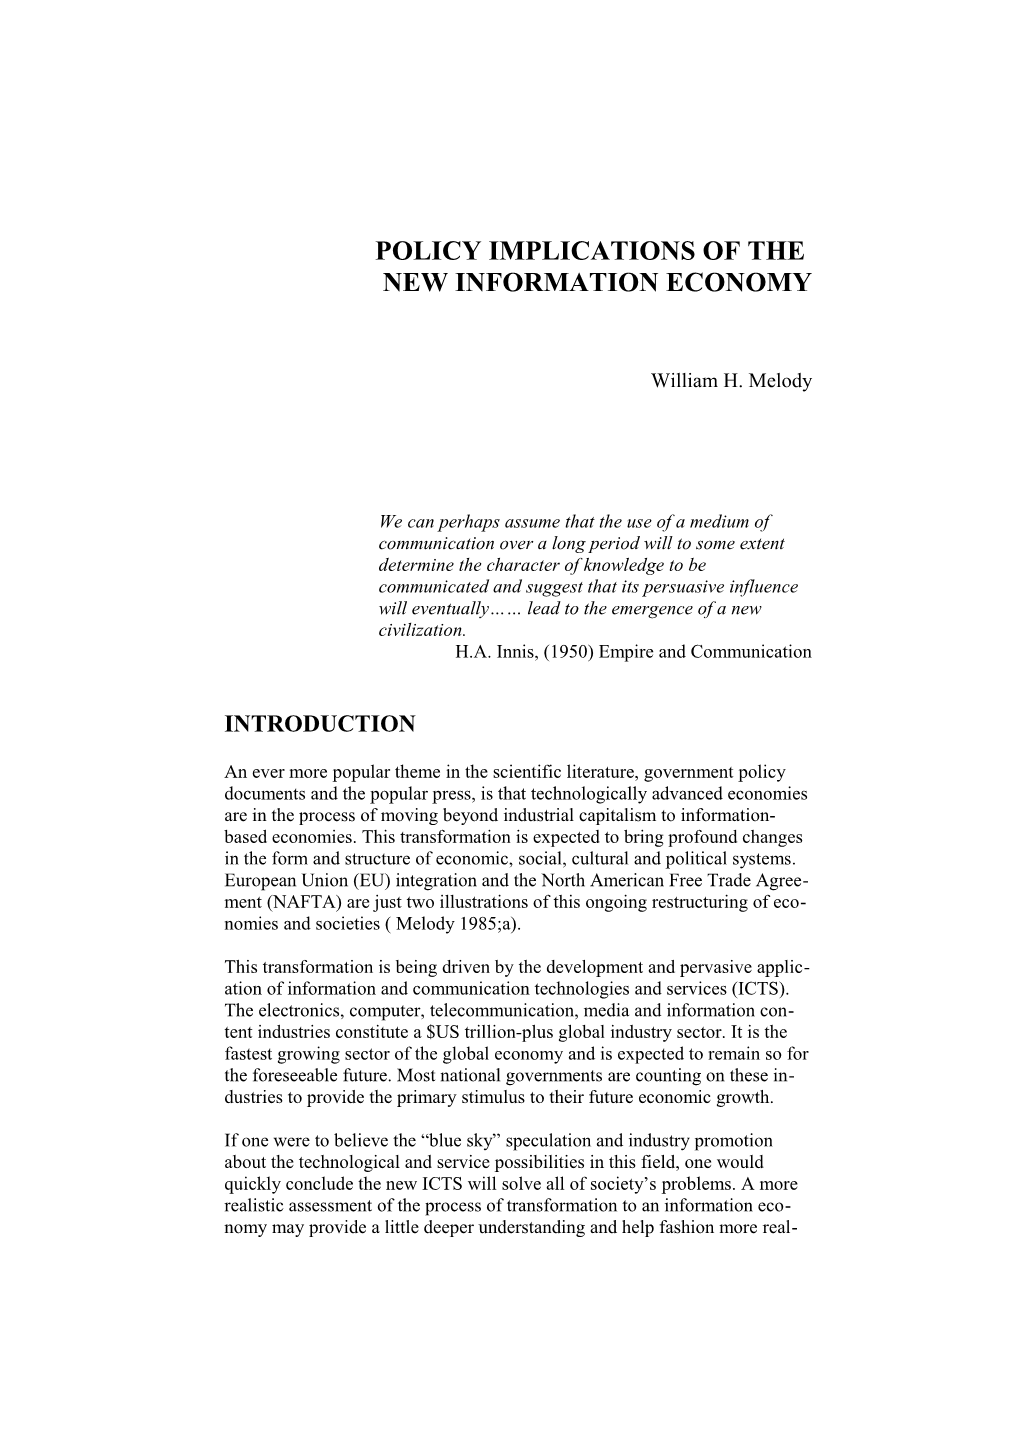 Policy Implications of the New Information Economy